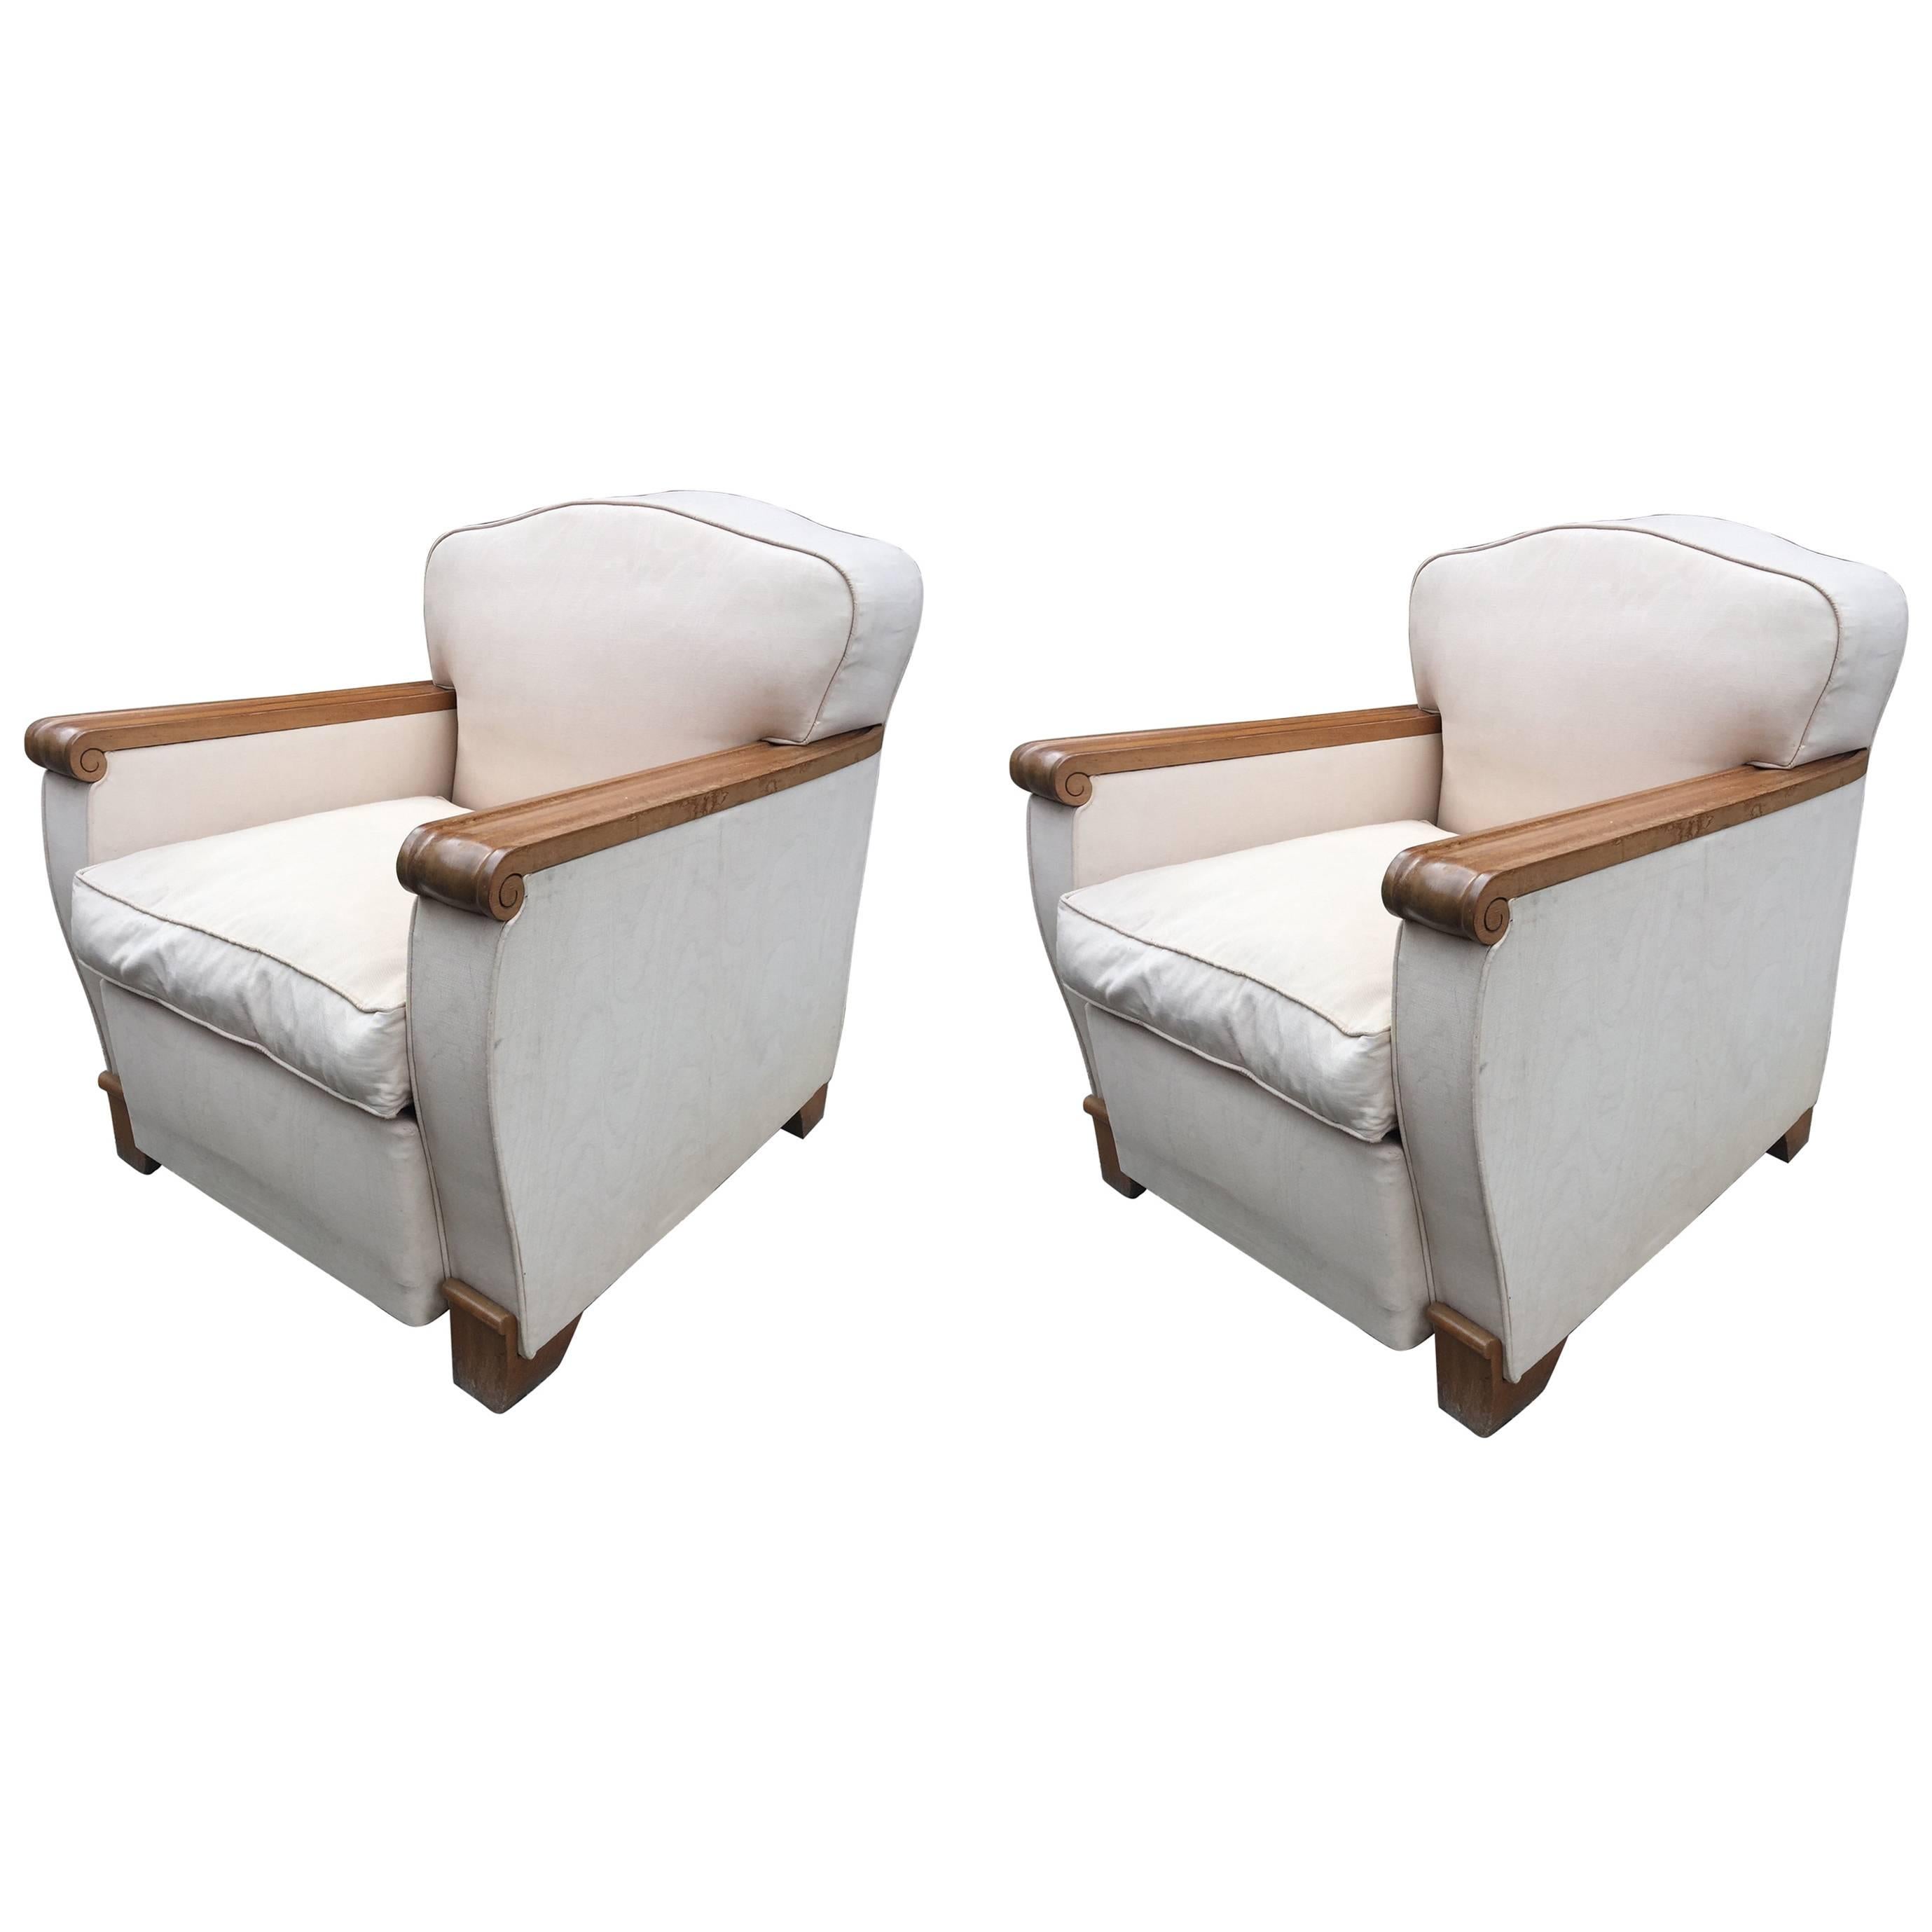 Gaston Poisson, Pair of Art Deco Blond Mahogany Armchairs For Sale